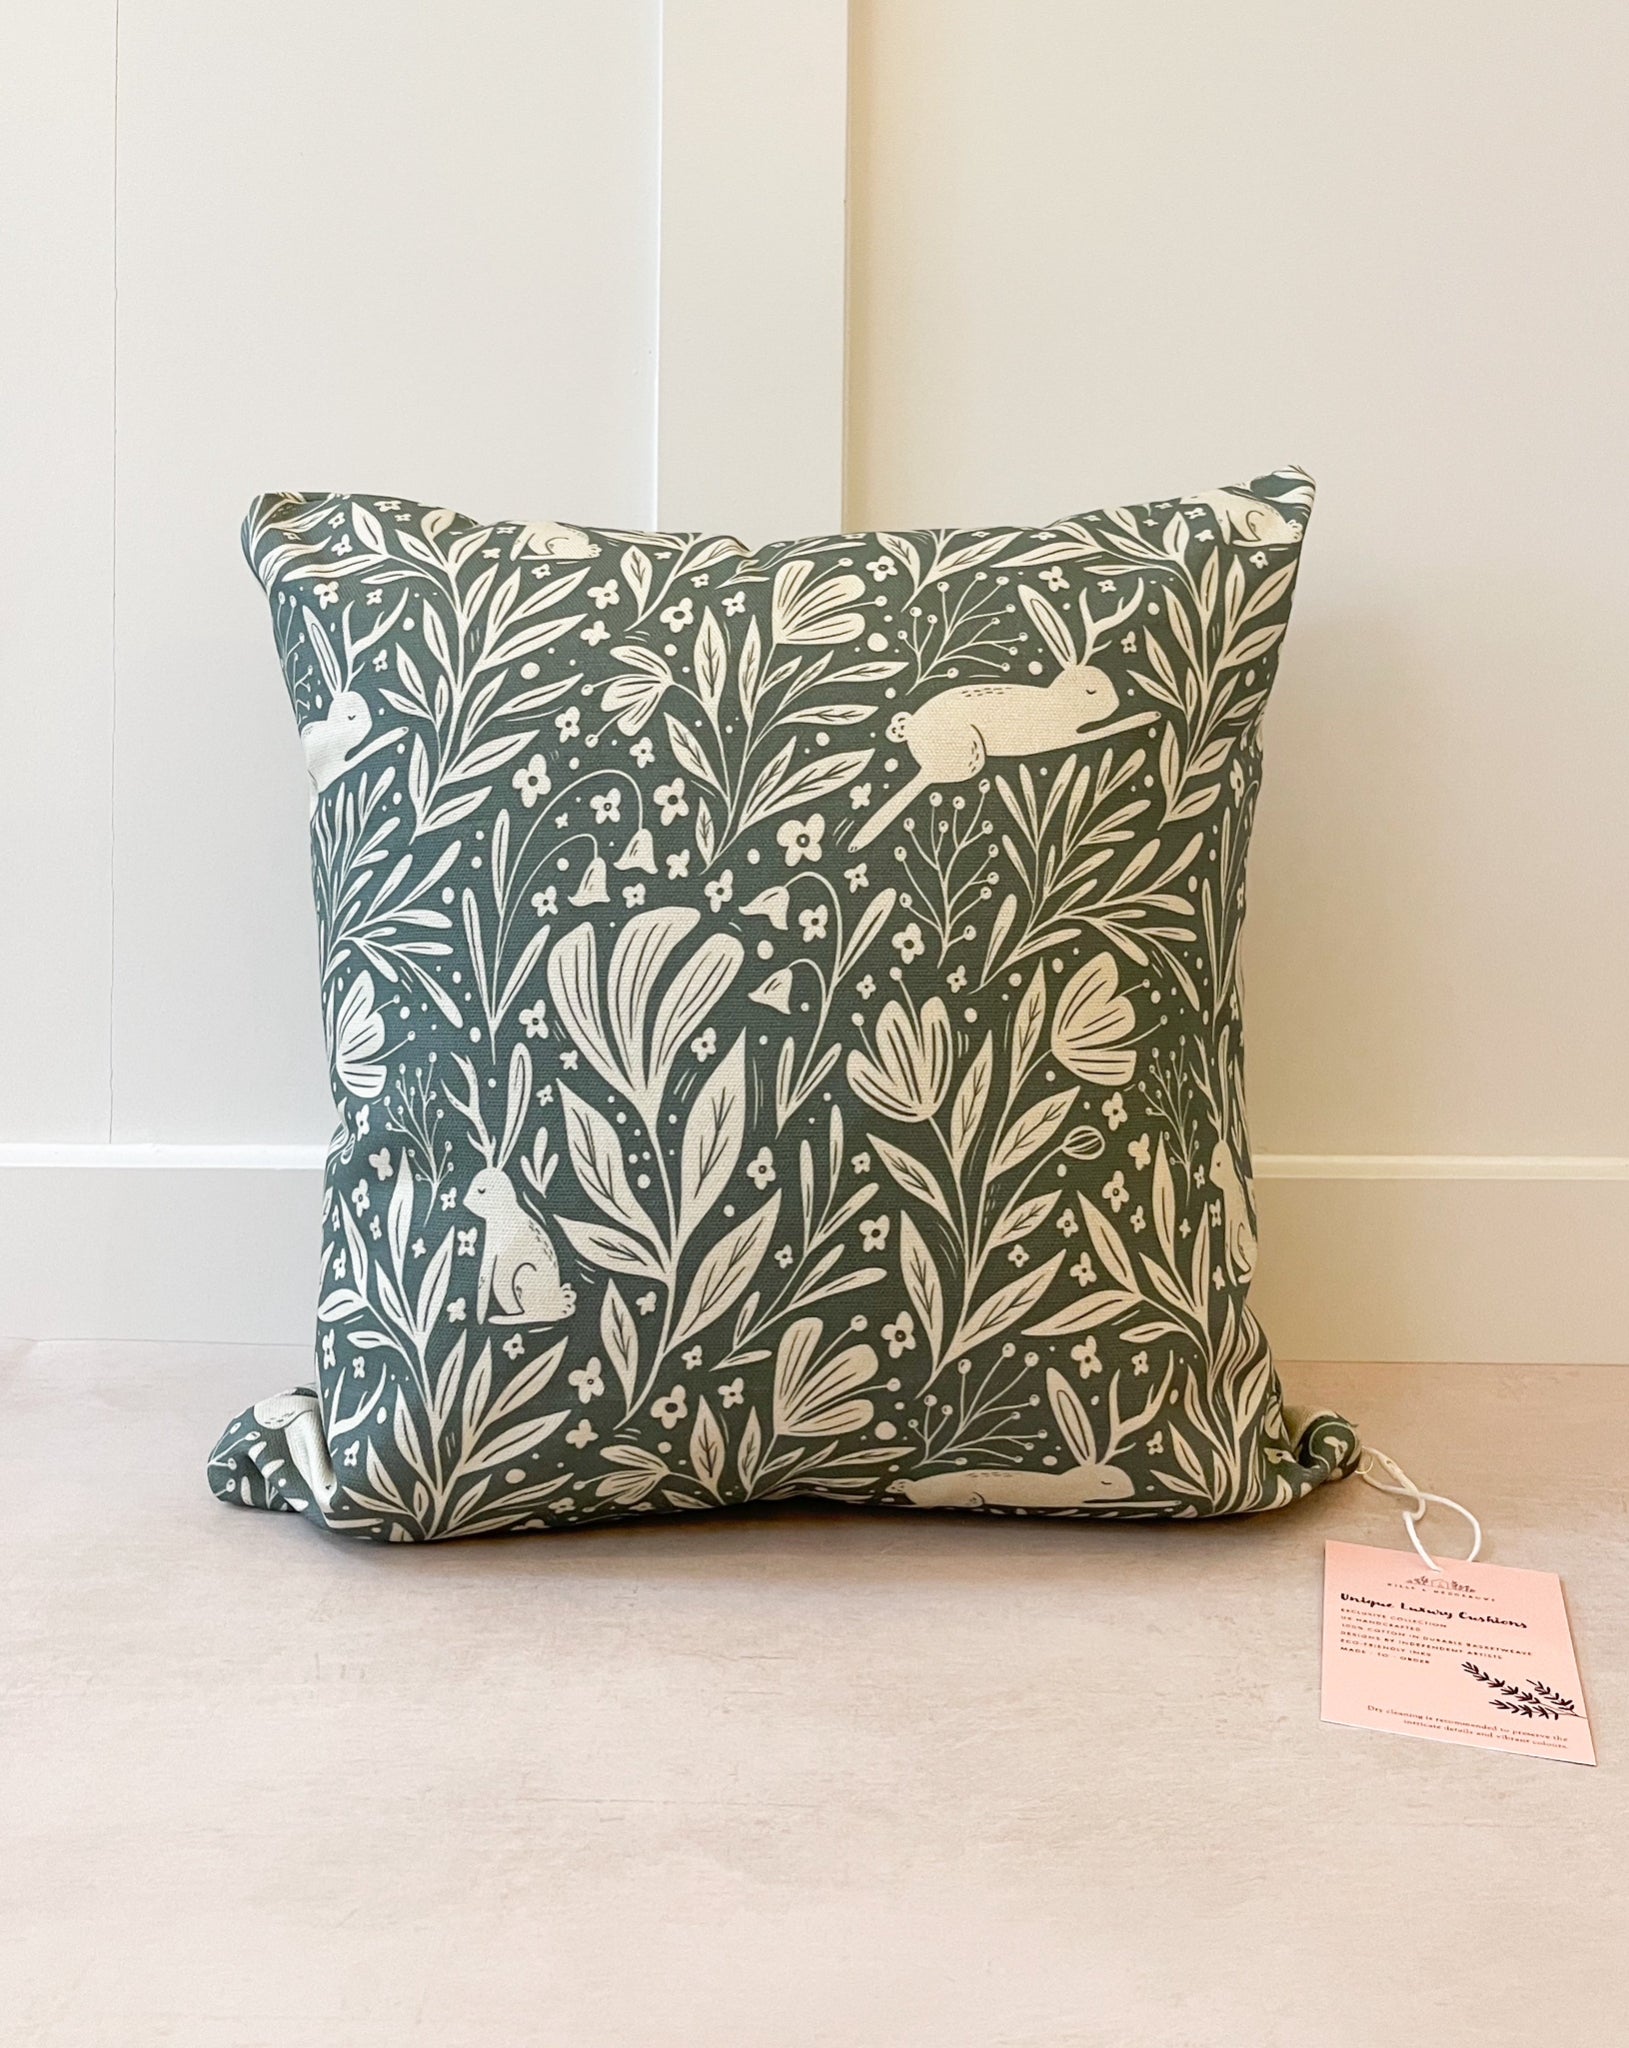 Botanical Cushion featuring an enchanting floral pattern with a leaping hare with one ear and one antler, set against a deep blue-green background with a cream foreground.